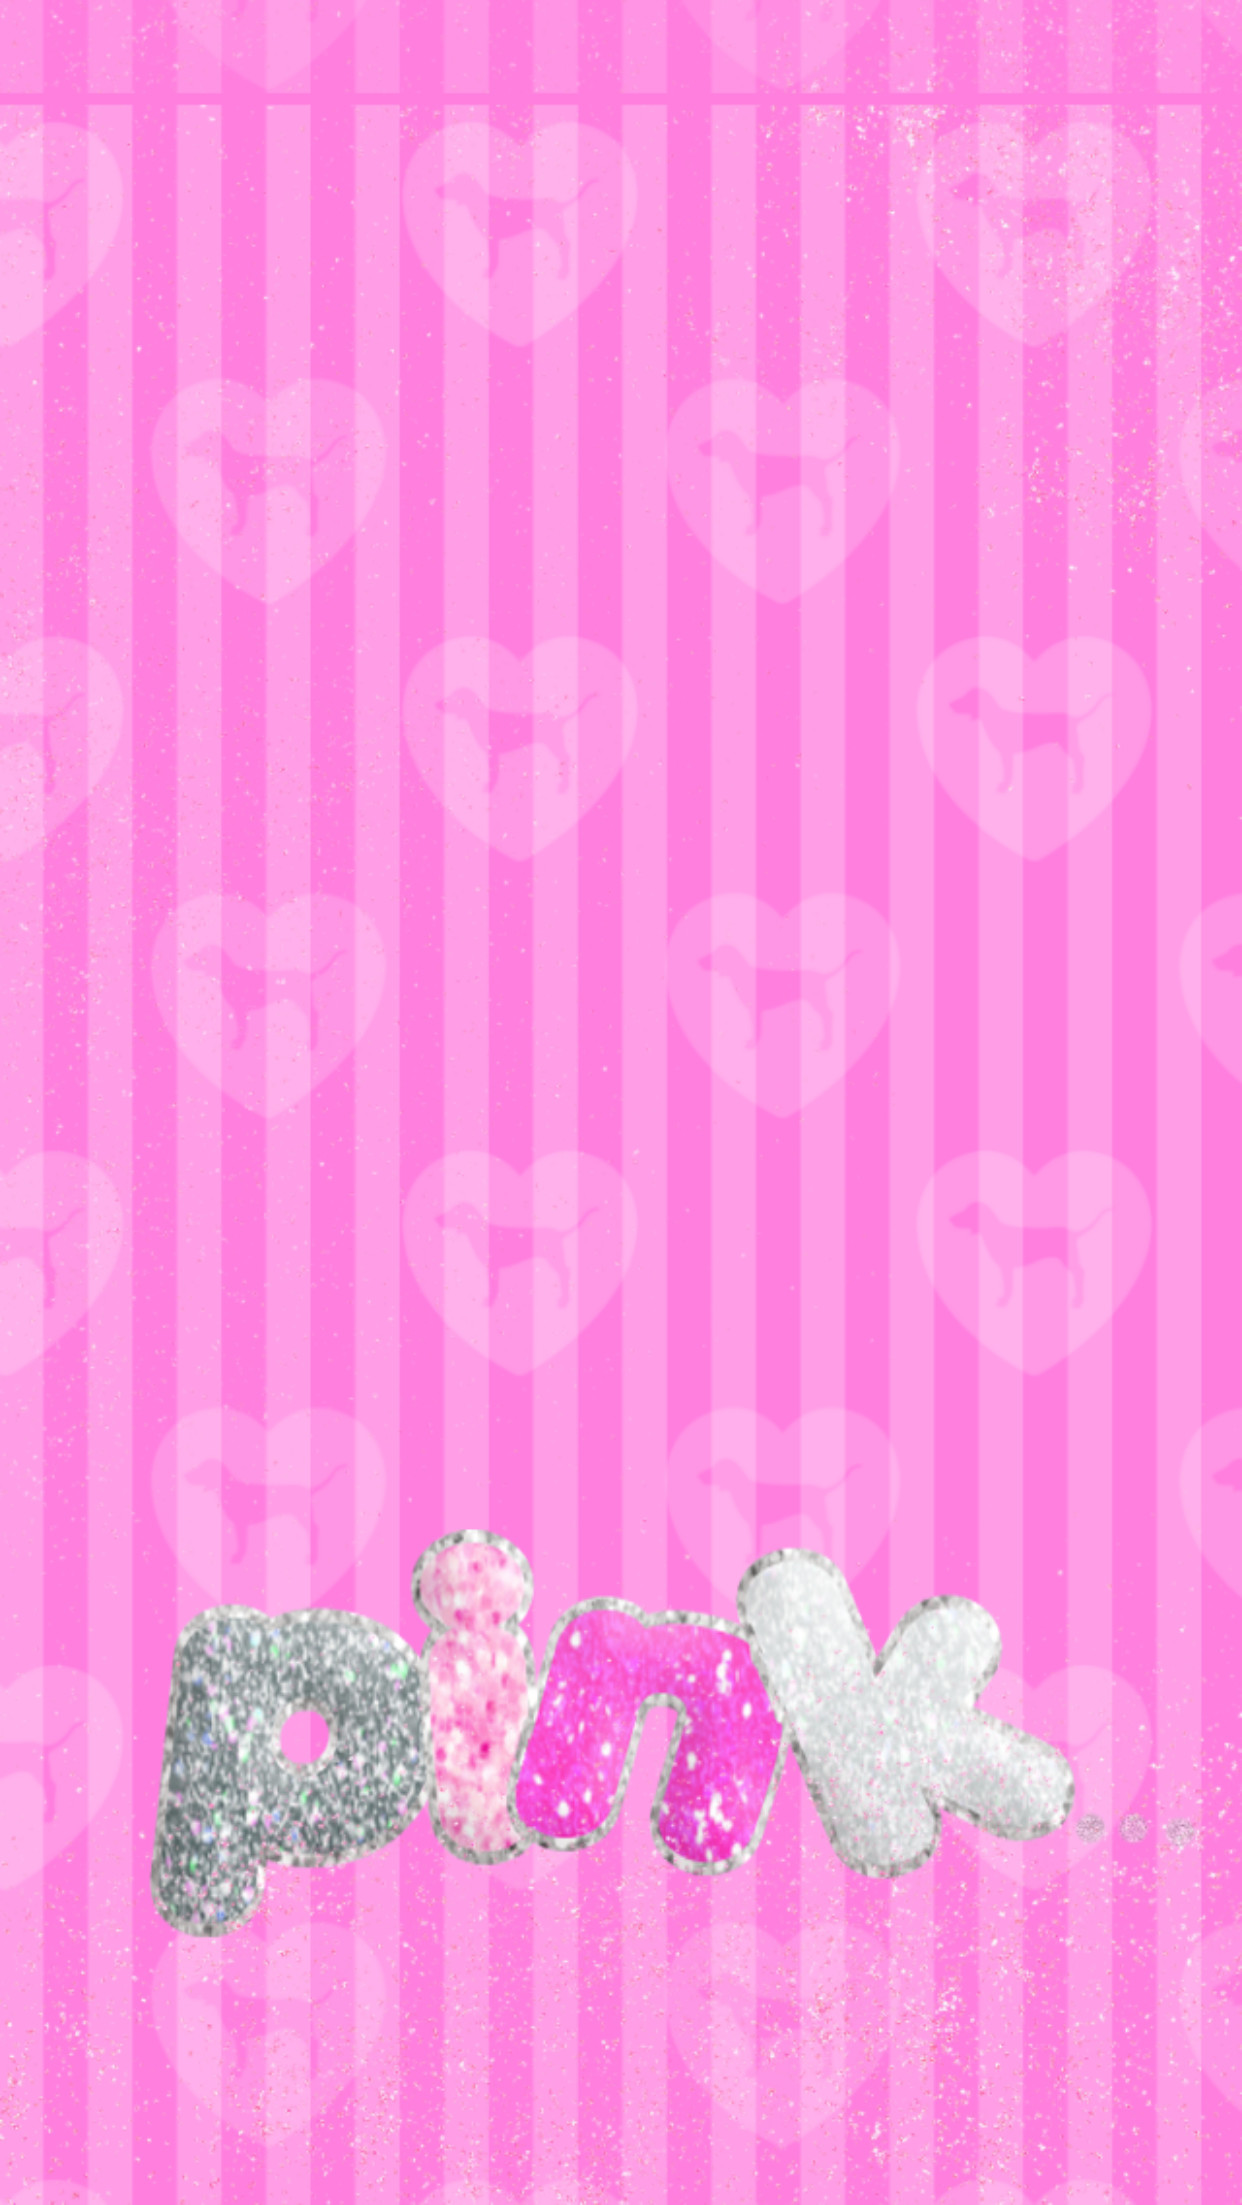 Cute Wallpapers, Phone Wallpapers, Iphone 3, Fashion - Hot Pink Girly Cute  Wallpaper For Phone - 1242x2205 Wallpaper 